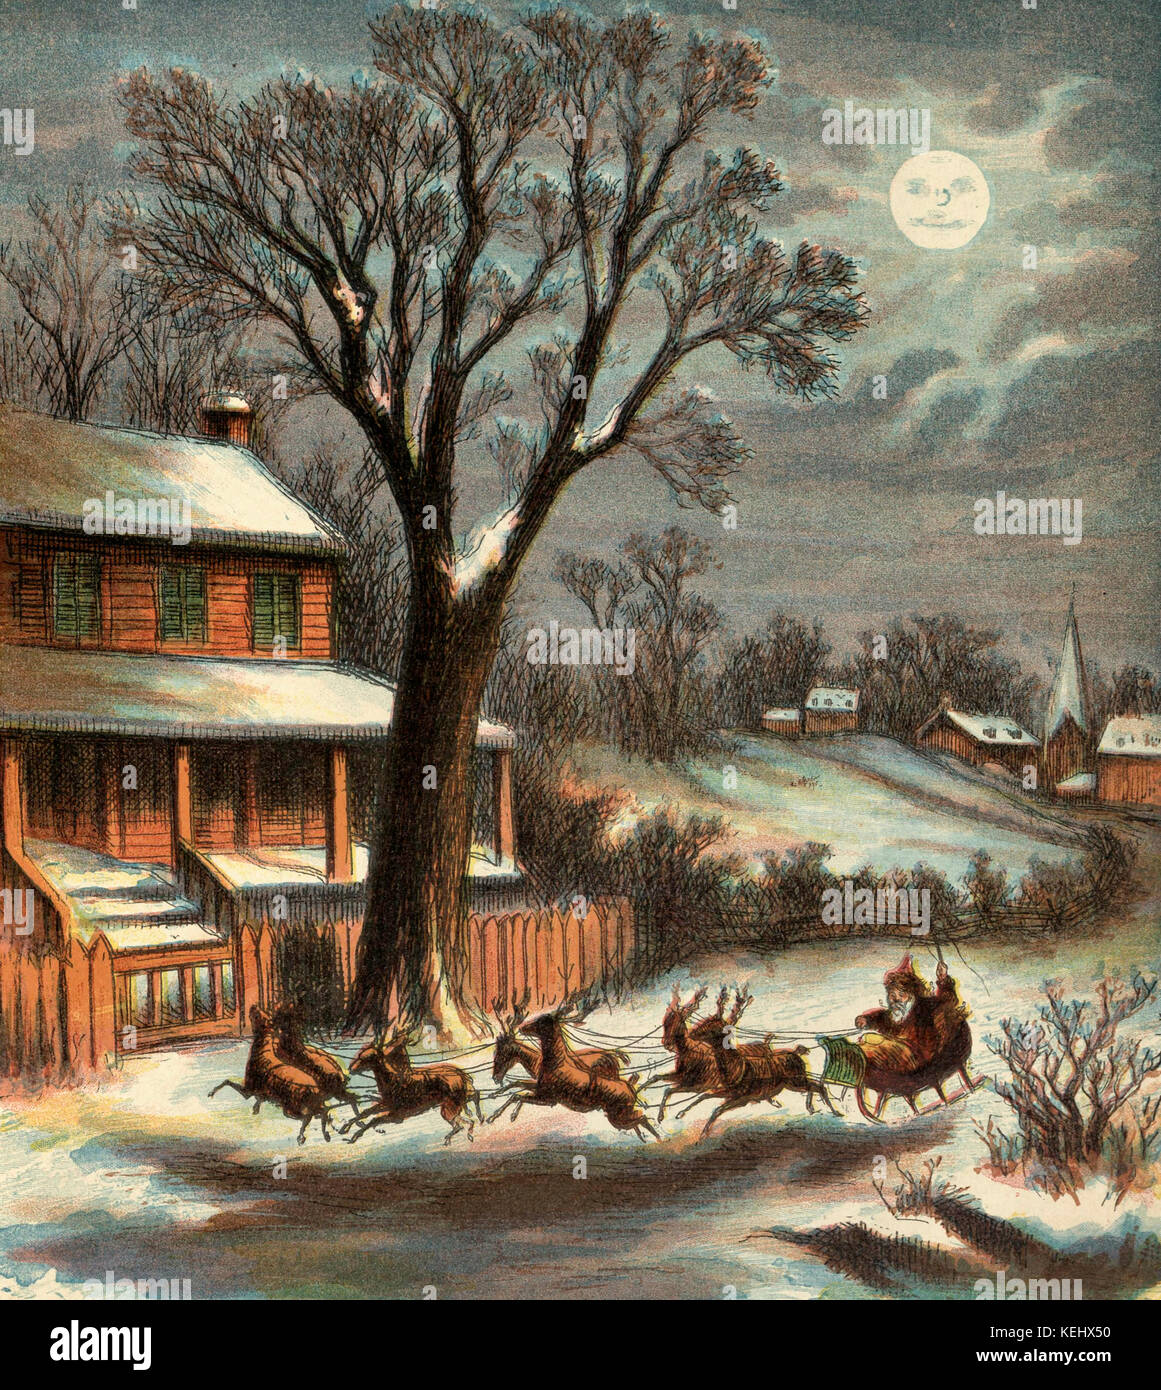 Vintage illustration of Santa Claus and his reindeers Stock Photo